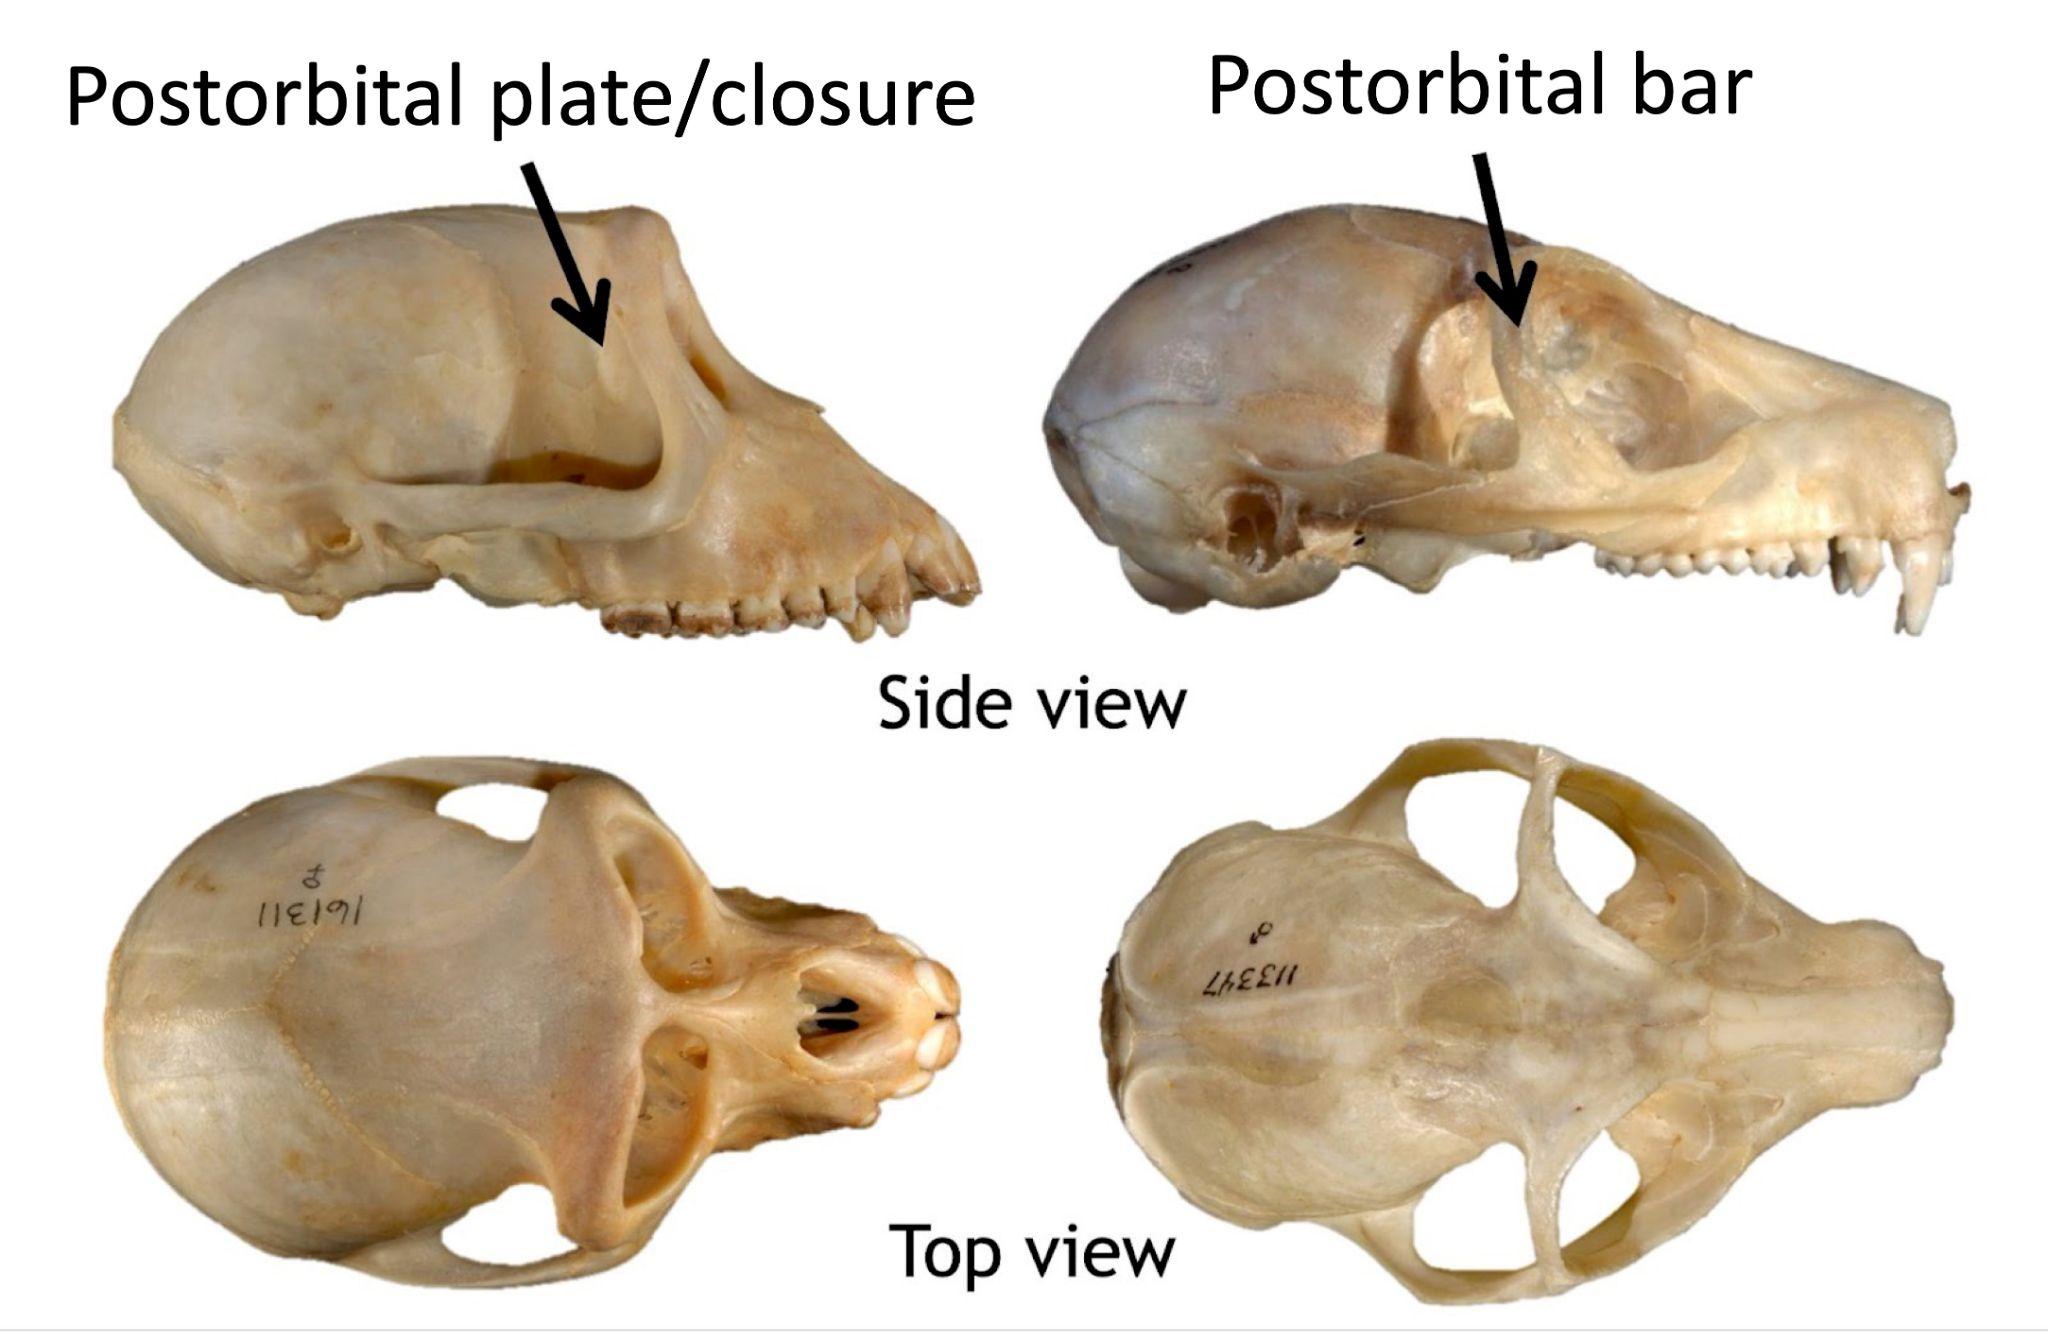 Skulls of a monkey and lemur viewed from the side and top.